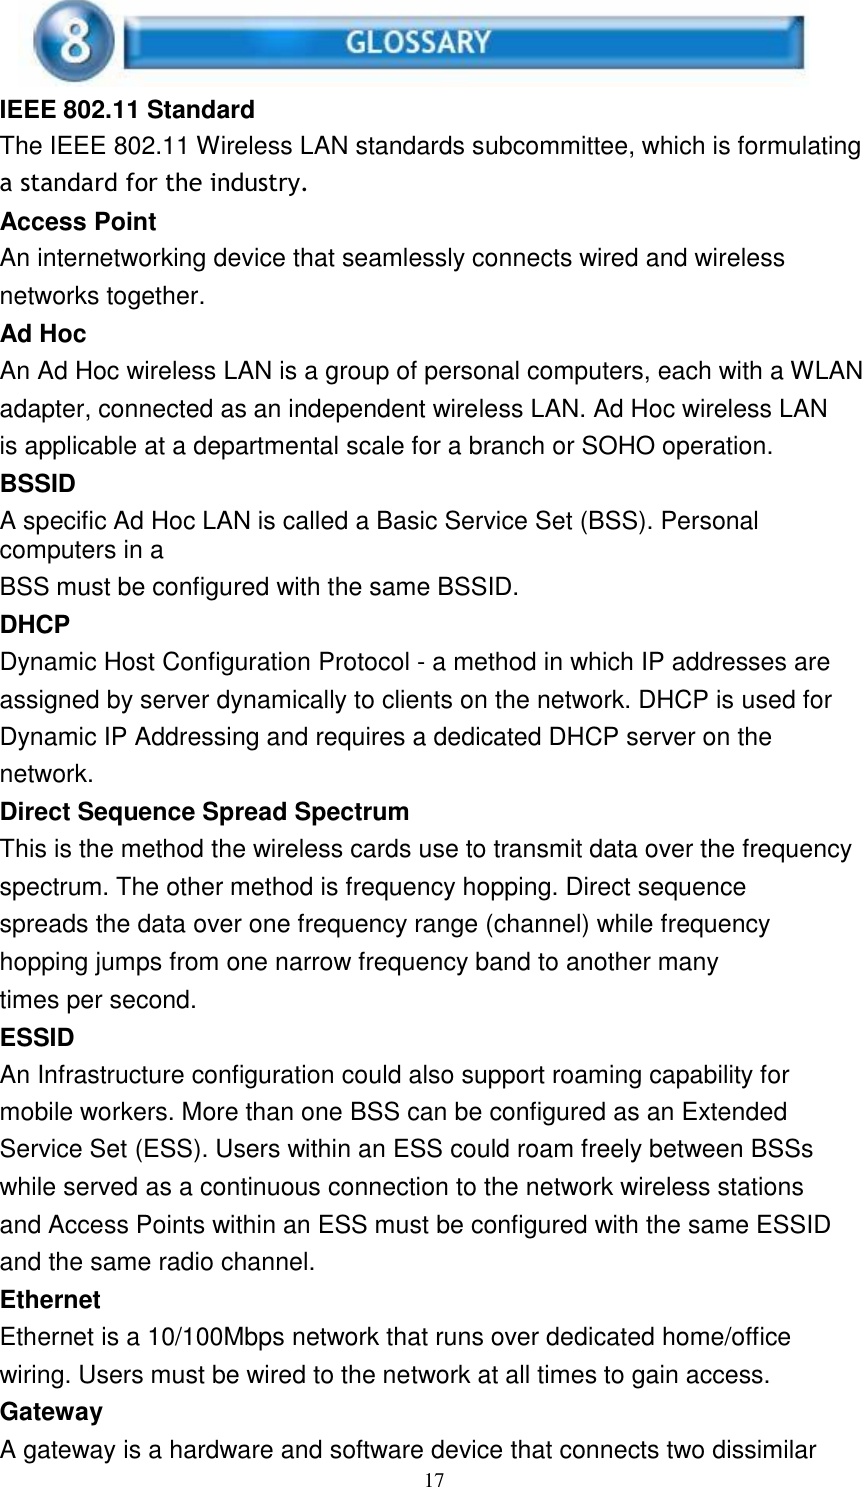 17      IEEE 802.11 Standard The IEEE 802.11 Wireless LAN standards subcommittee, which is formulating a standard for the industry. Access Point An internetworking device that seamlessly connects wired and wireless networks together. Ad Hoc An Ad Hoc wireless LAN is a group of personal computers, each with a WLAN adapter, connected as an independent wireless LAN. Ad Hoc wireless LAN is applicable at a departmental scale for a branch or SOHO operation. BSSID A specific Ad Hoc LAN is called a Basic Service Set (BSS). Personal computers in a BSS must be configured with the same BSSID. DHCP Dynamic Host Configuration Protocol - a method in which IP addresses are assigned by server dynamically to clients on the network. DHCP is used for Dynamic IP Addressing and requires a dedicated DHCP server on the network. Direct Sequence Spread Spectrum This is the method the wireless cards use to transmit data over the frequency spectrum. The other method is frequency hopping. Direct sequence spreads the data over one frequency range (channel) while frequency hopping jumps from one narrow frequency band to another many times per second. ESSID An Infrastructure configuration could also support roaming capability for mobile workers. More than one BSS can be configured as an Extended Service Set (ESS). Users within an ESS could roam freely between BSSs while served as a continuous connection to the network wireless stations and Access Points within an ESS must be configured with the same ESSID and the same radio channel. Ethernet Ethernet is a 10/100Mbps network that runs over dedicated home/office wiring. Users must be wired to the network at all times to gain access. Gateway A gateway is a hardware and software device that connects two dissimilar 